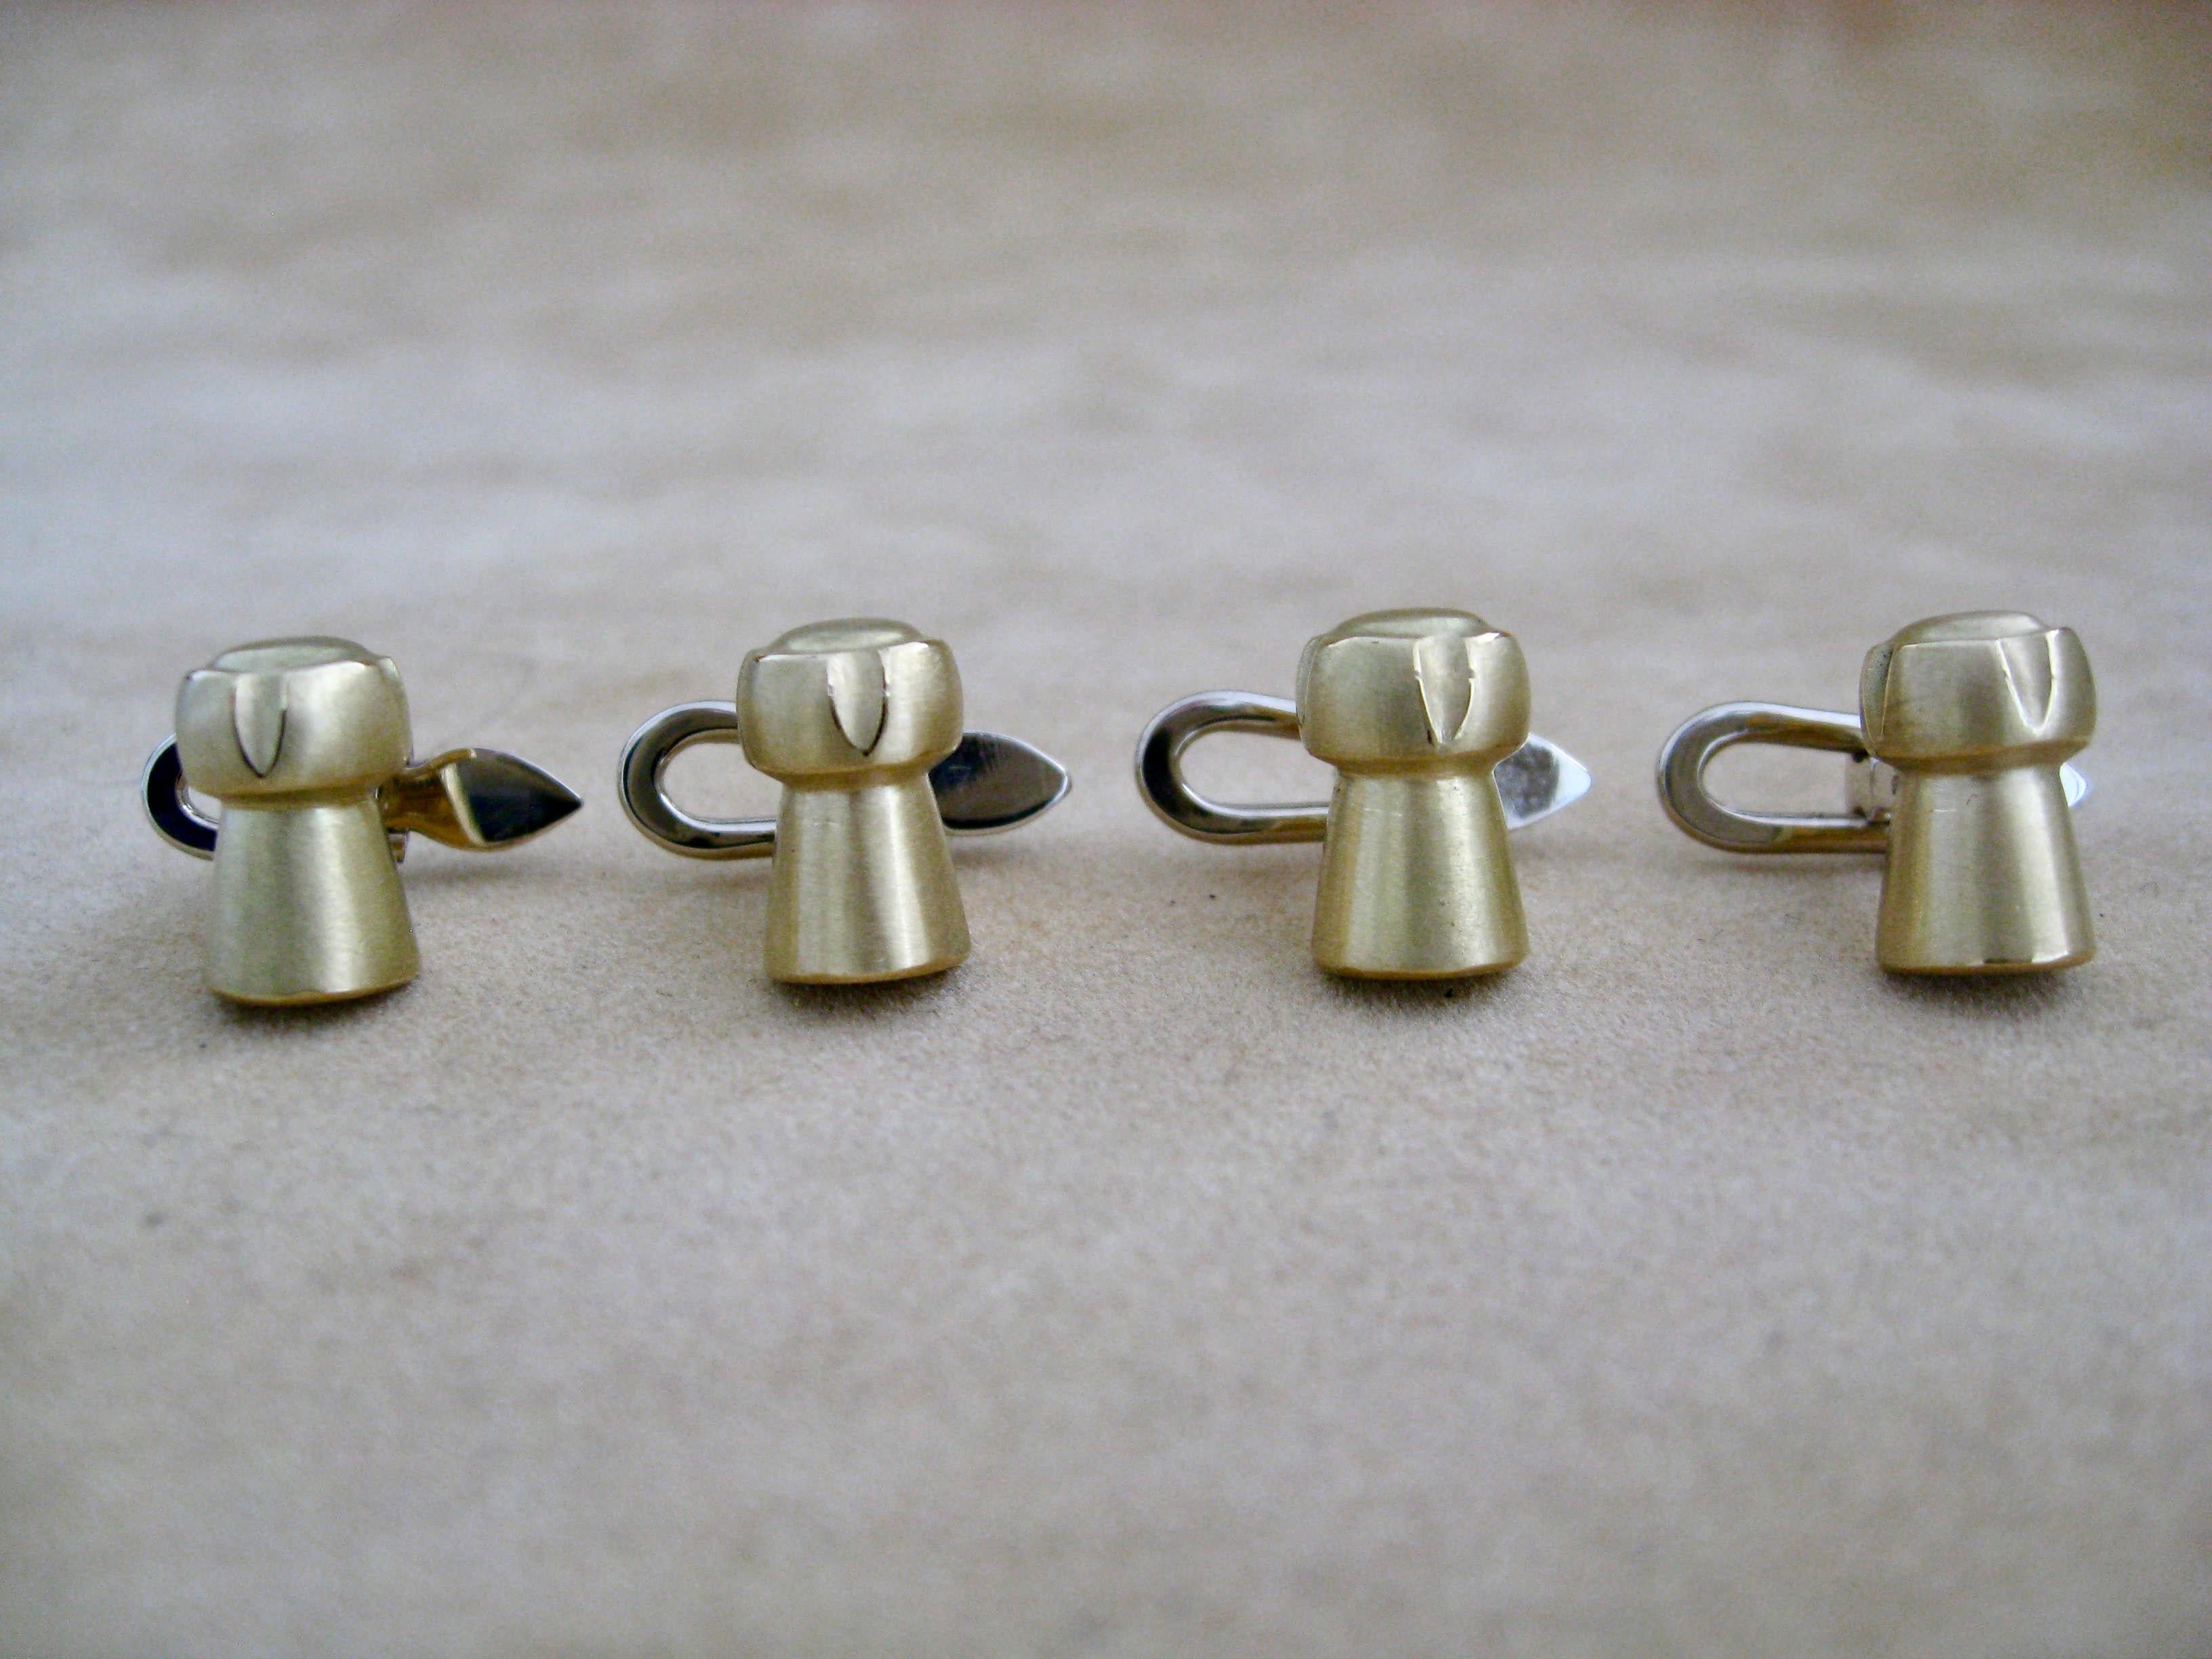 Contemporary Michael Kanners 18kt Yellow Gold Champagne Cork Shirt Studs (4)